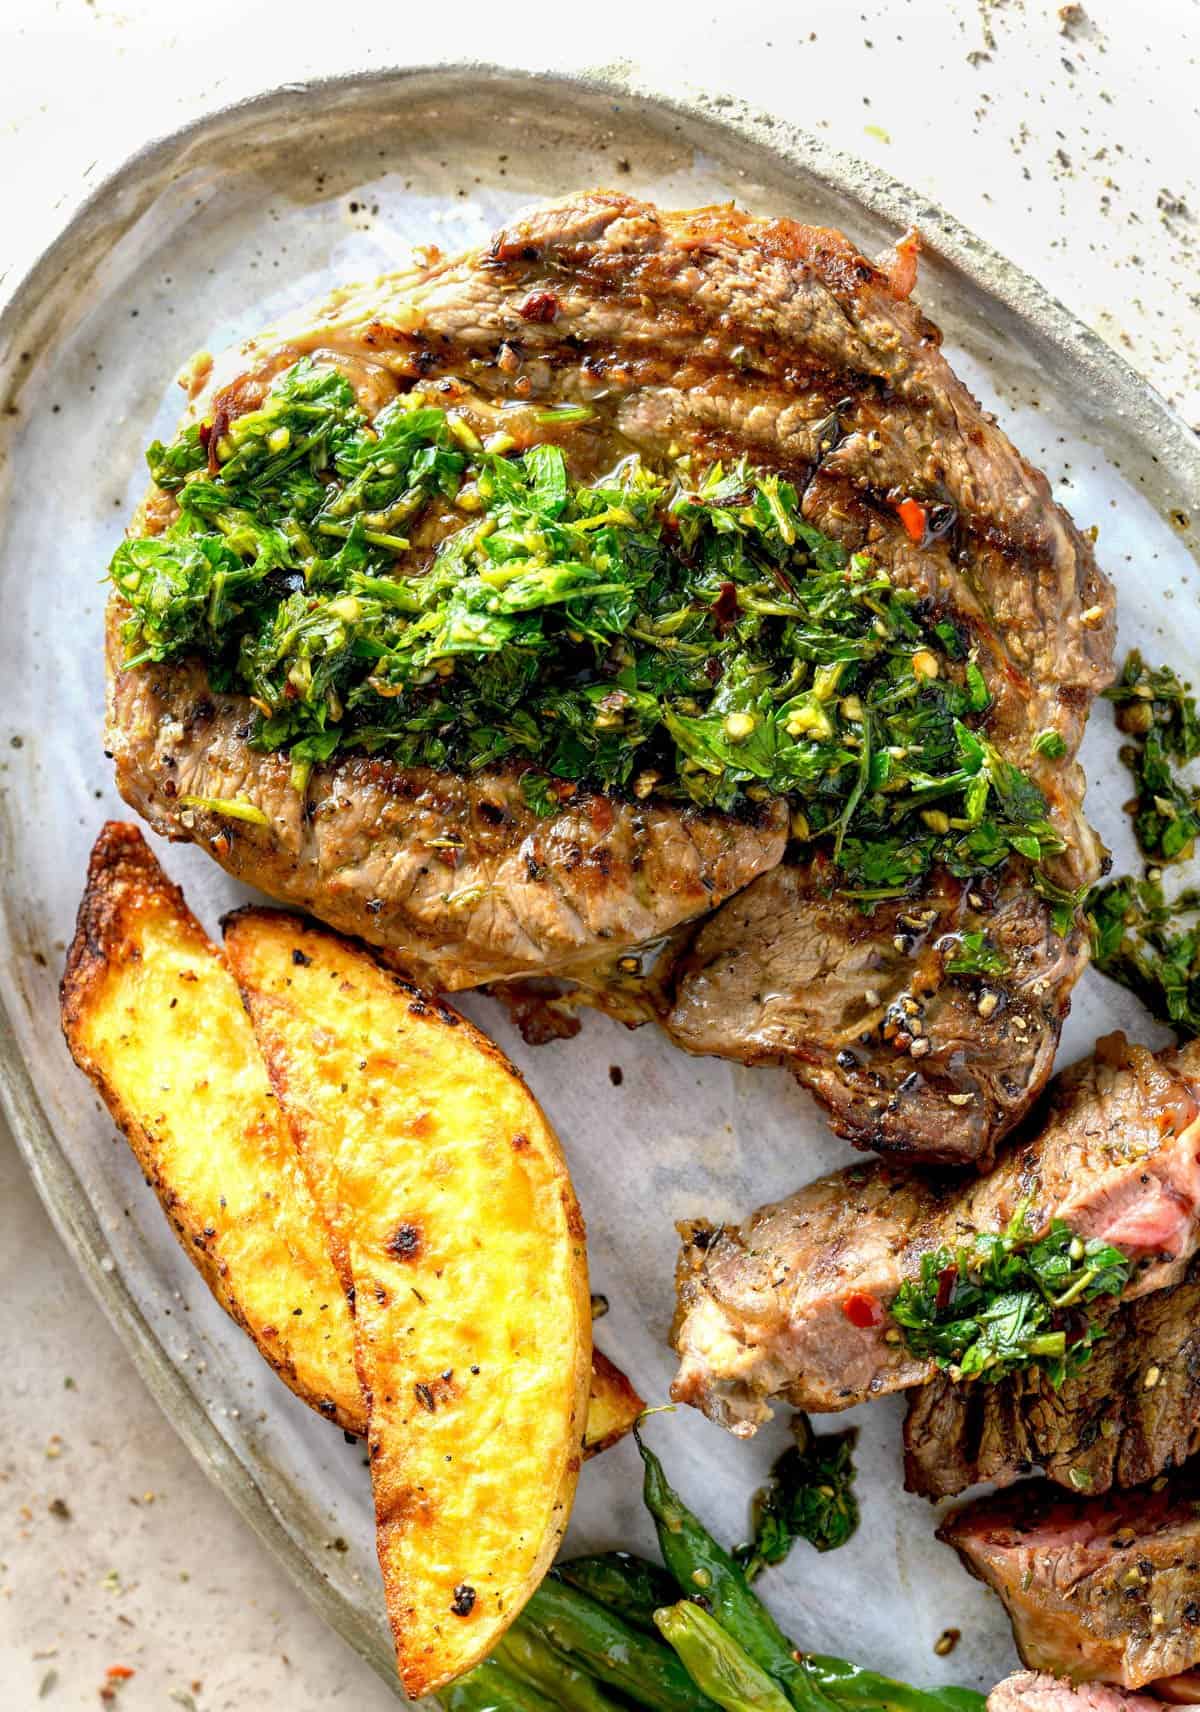 A grilled ribeye steak with chimichurri sauce next to potato wedges.